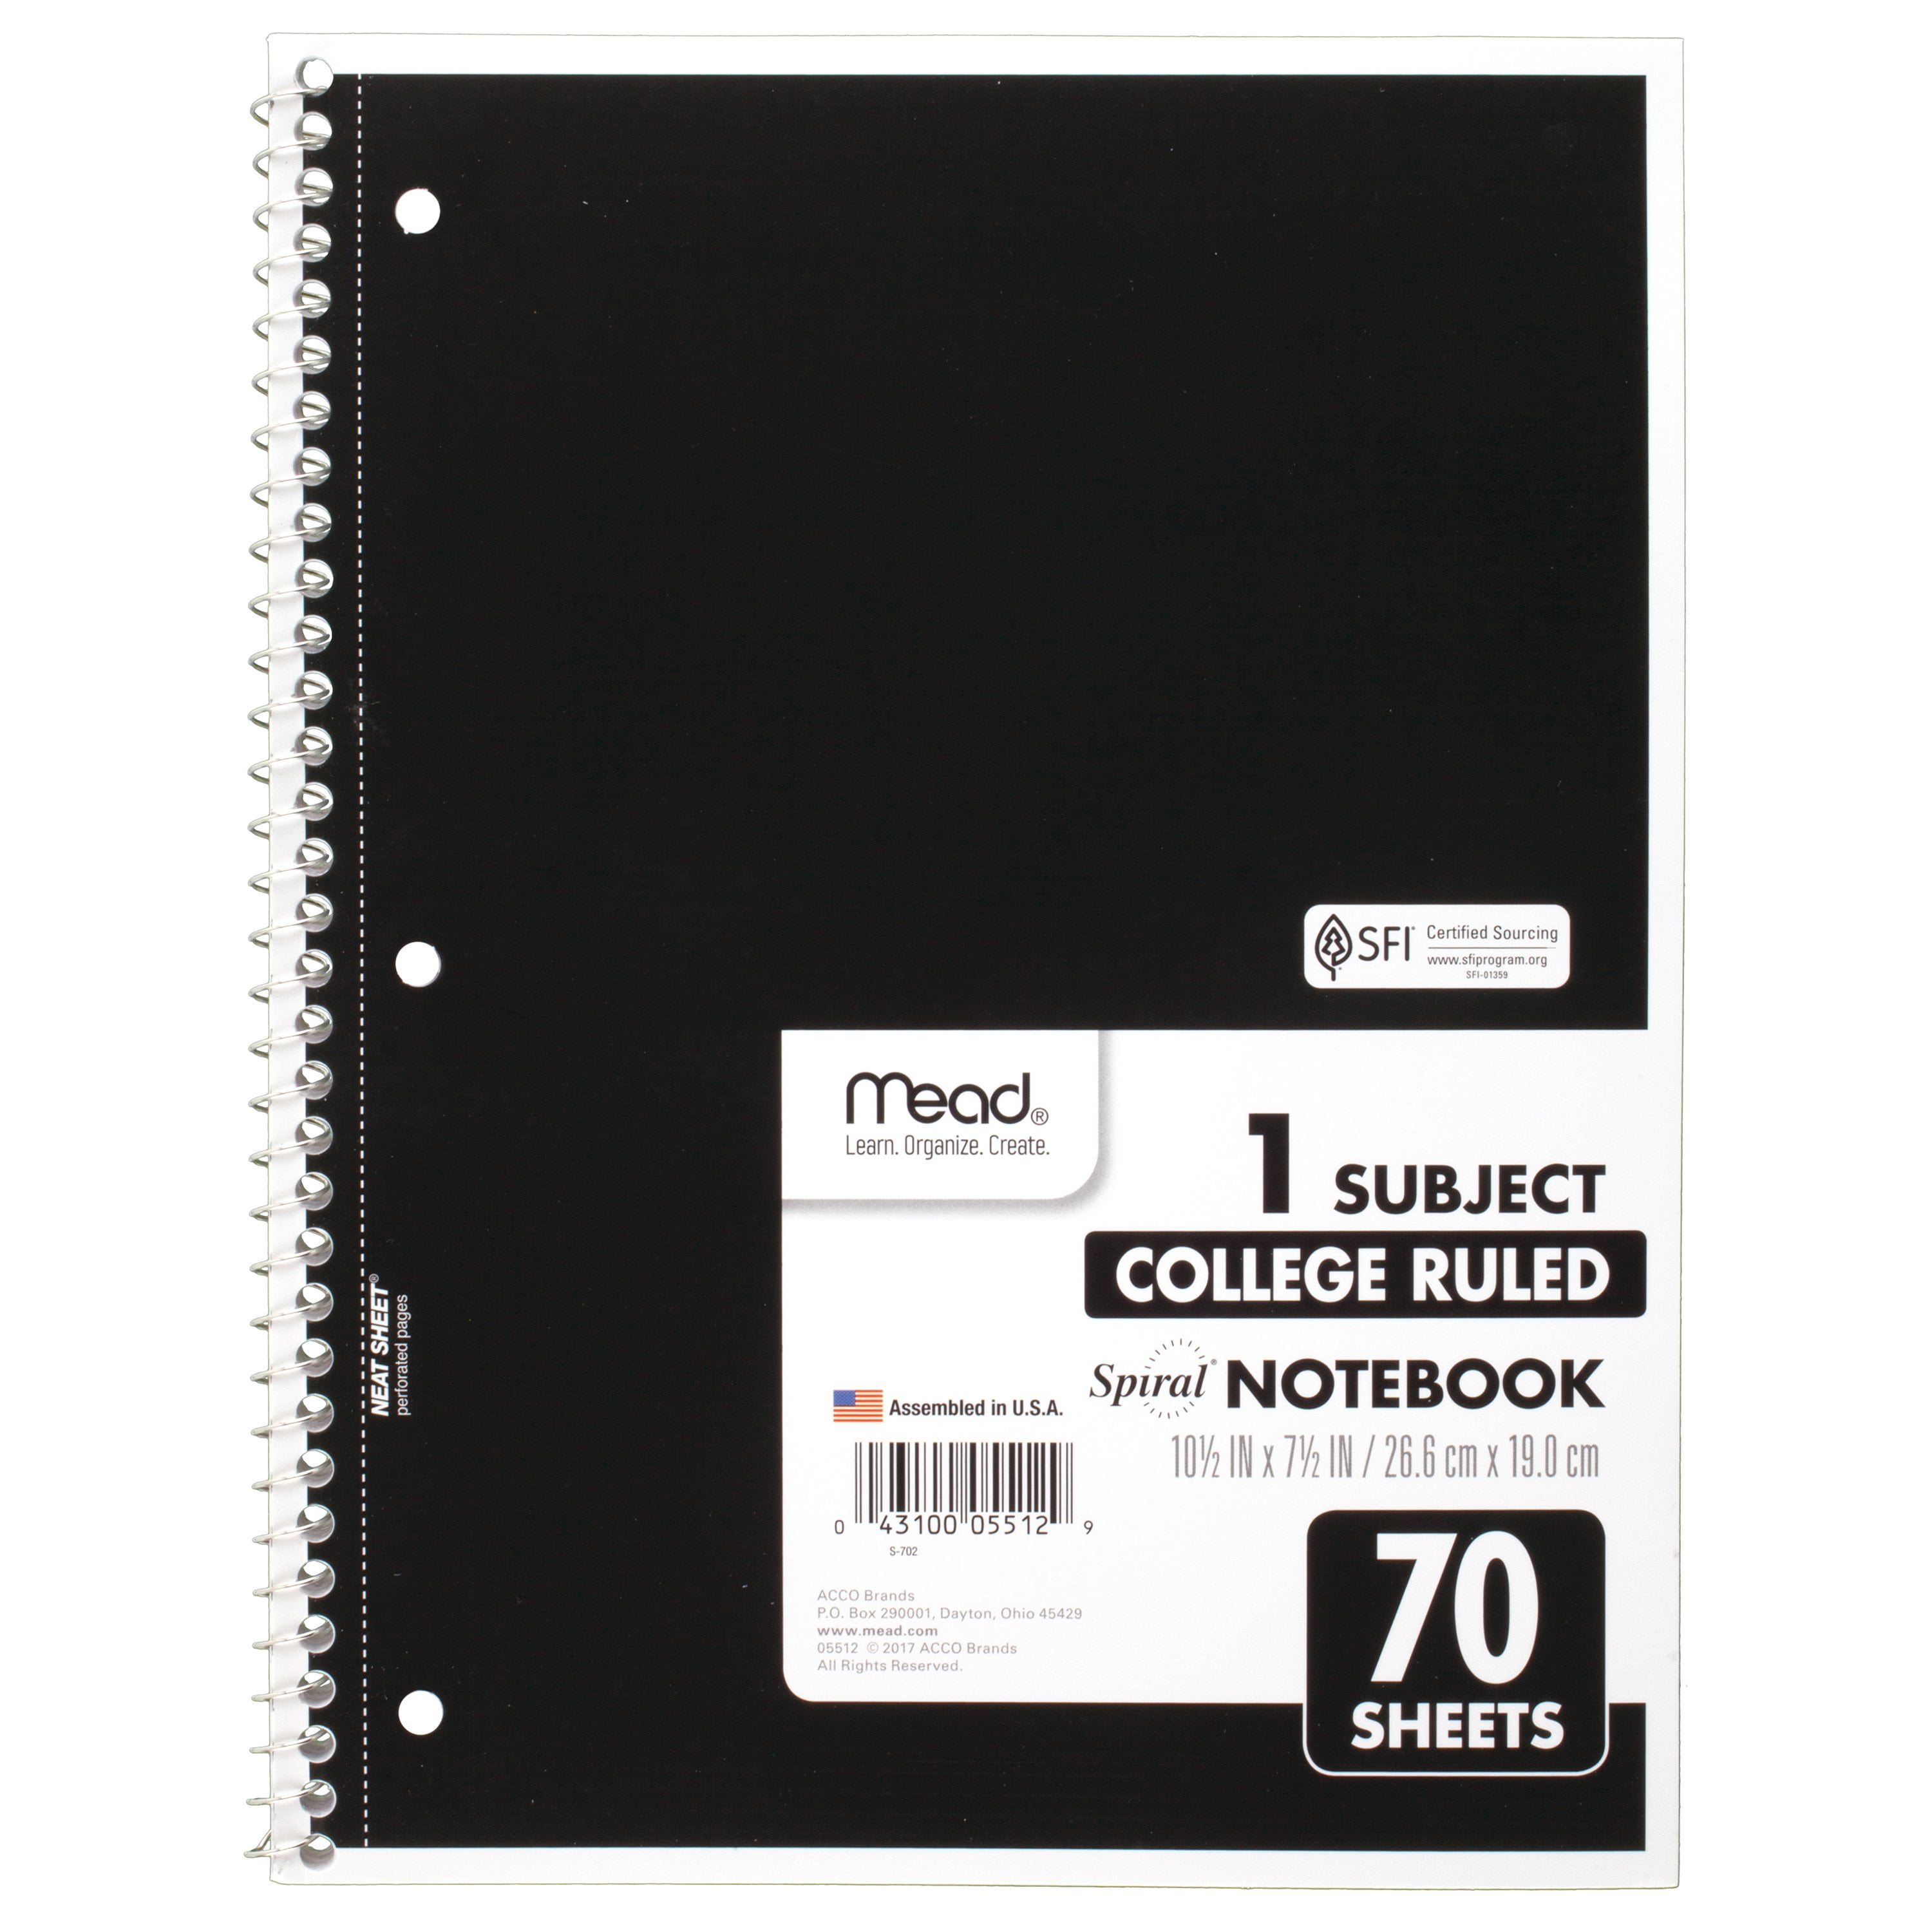 Mead Spiral Notebook 1 Subject College Ruled 70 Sheets 10 12 x 7